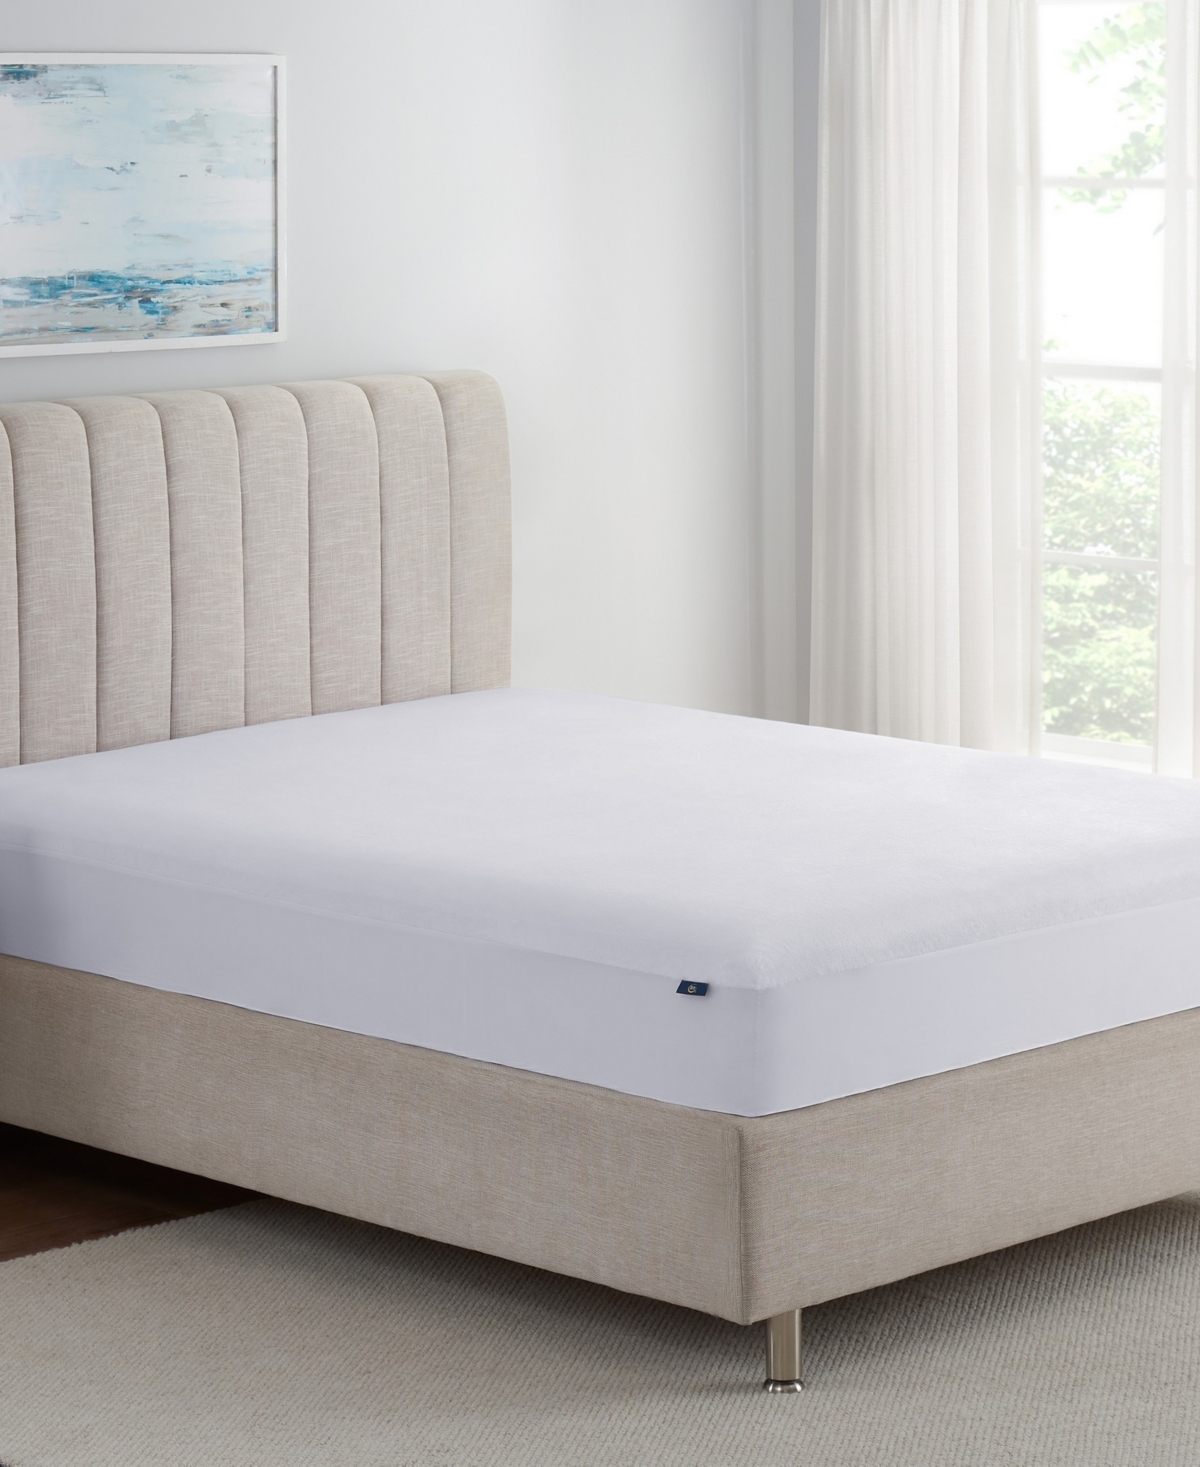 Serta Soft Top Water-resistant Mattress Protector, Full In White